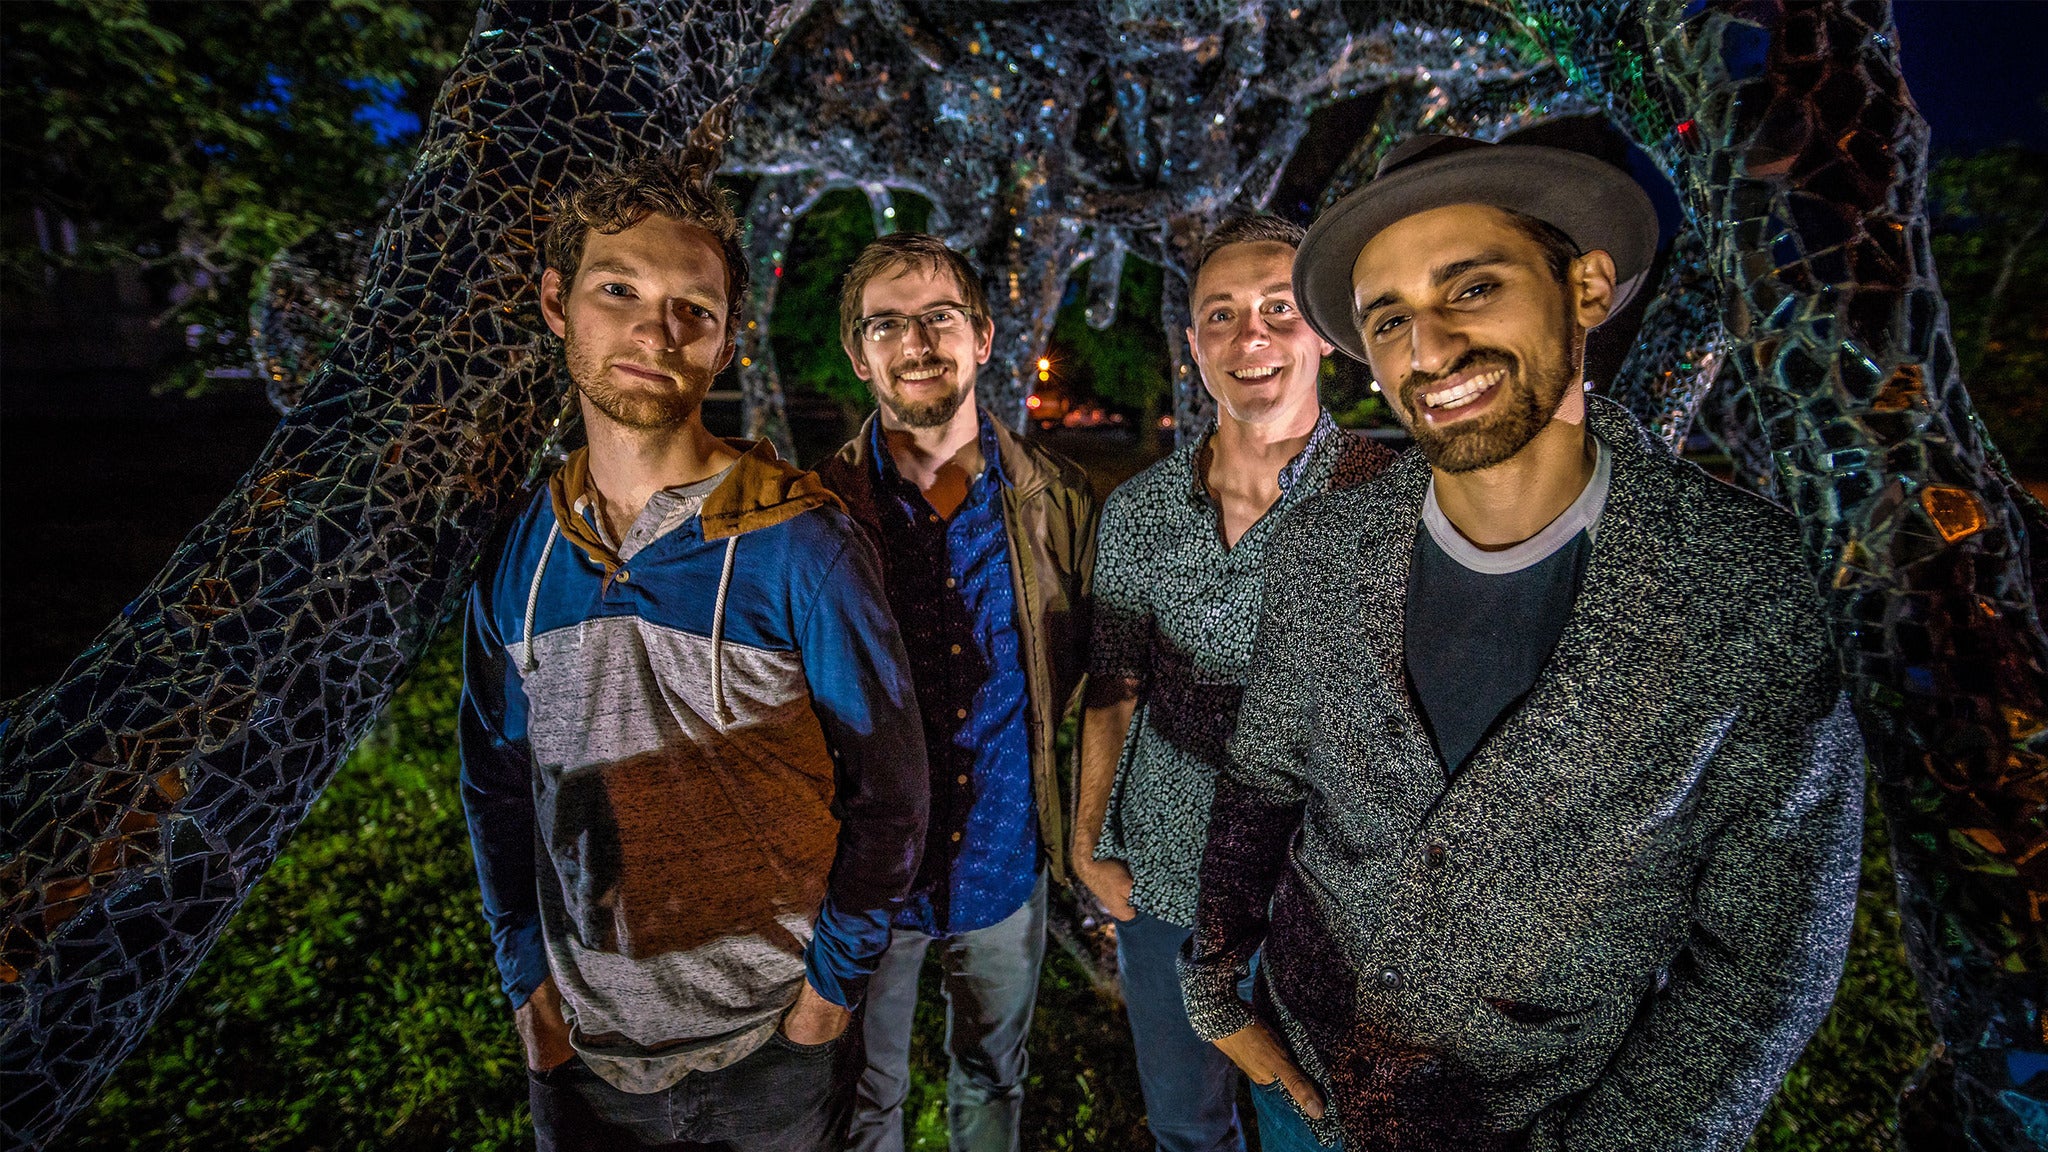 Aqueous in New Orleans promo photo for Live Nation Mobile App presale offer code